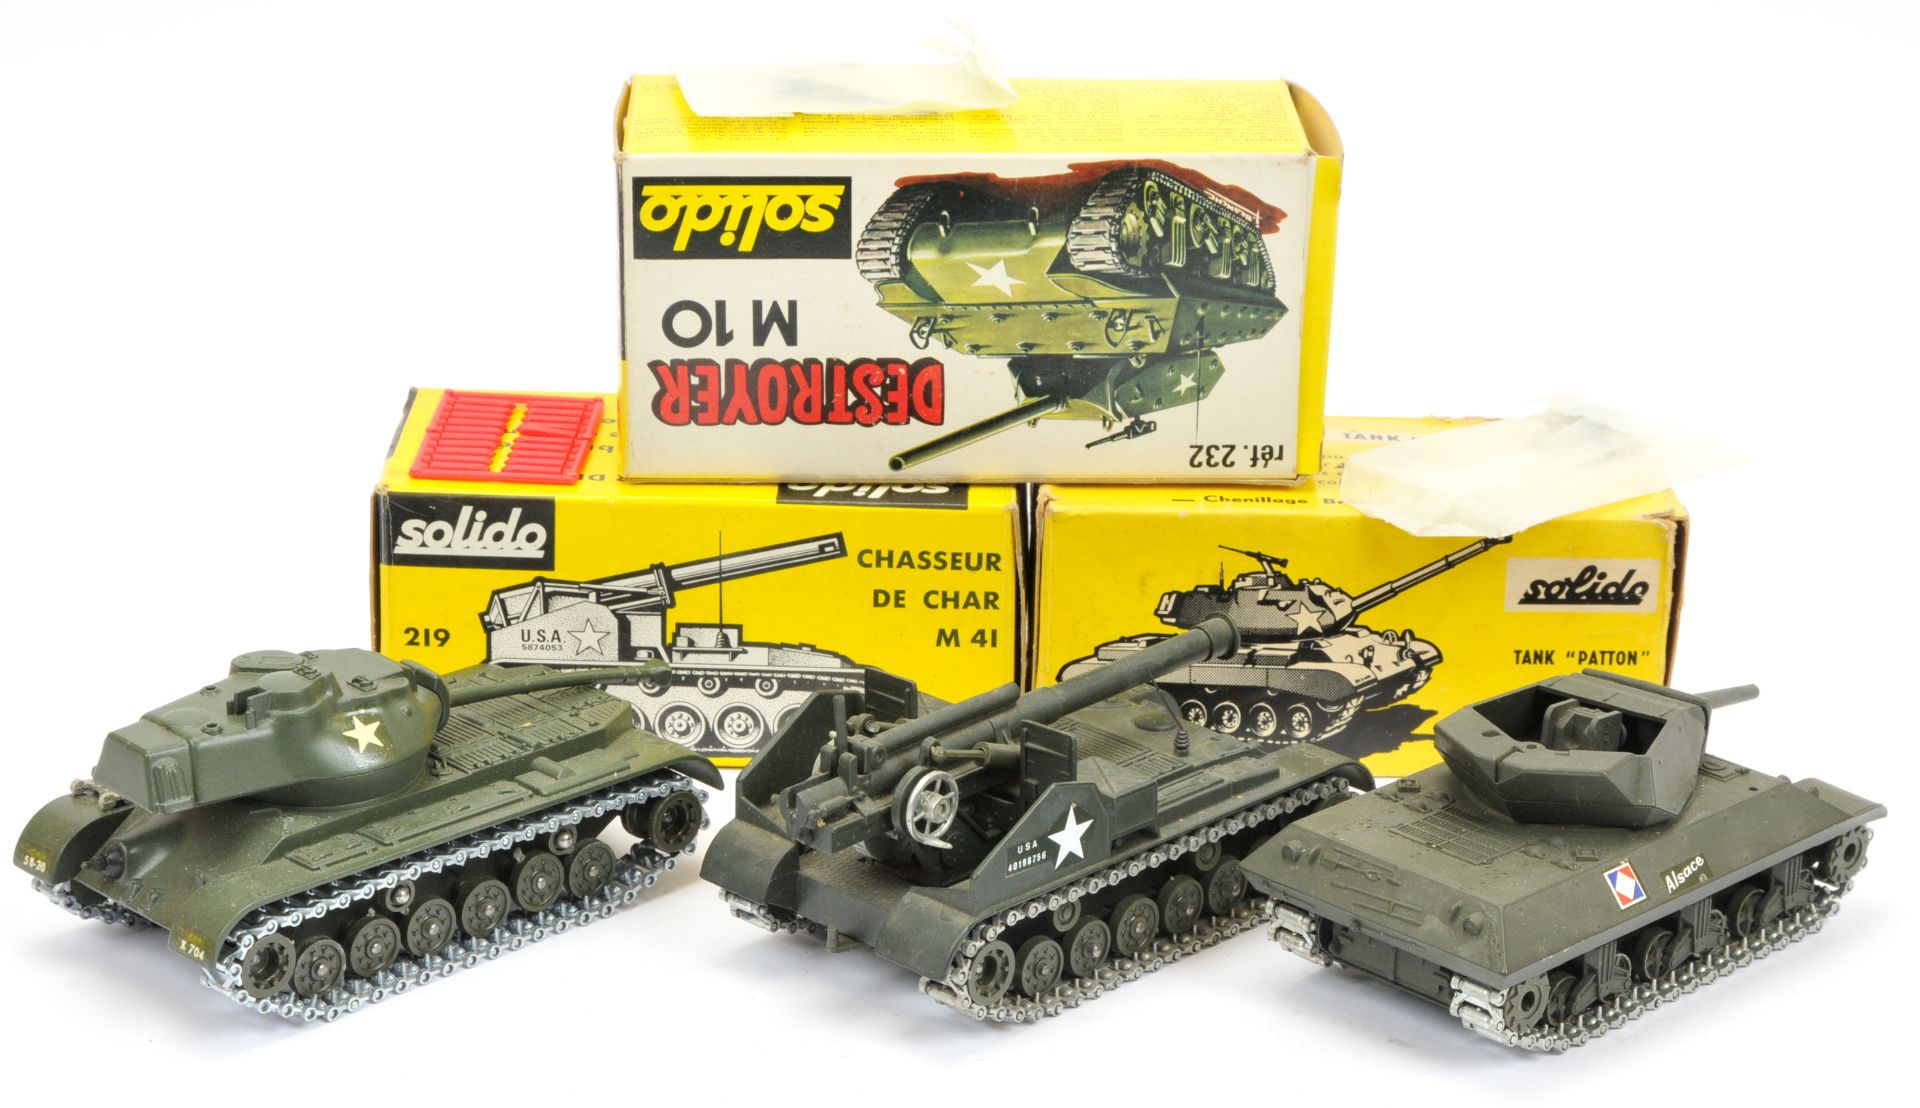 Solido military group of 3 Tanks - (1) 202 Patton - green, (2) 219 Chasseur M41  - Image 2 of 2